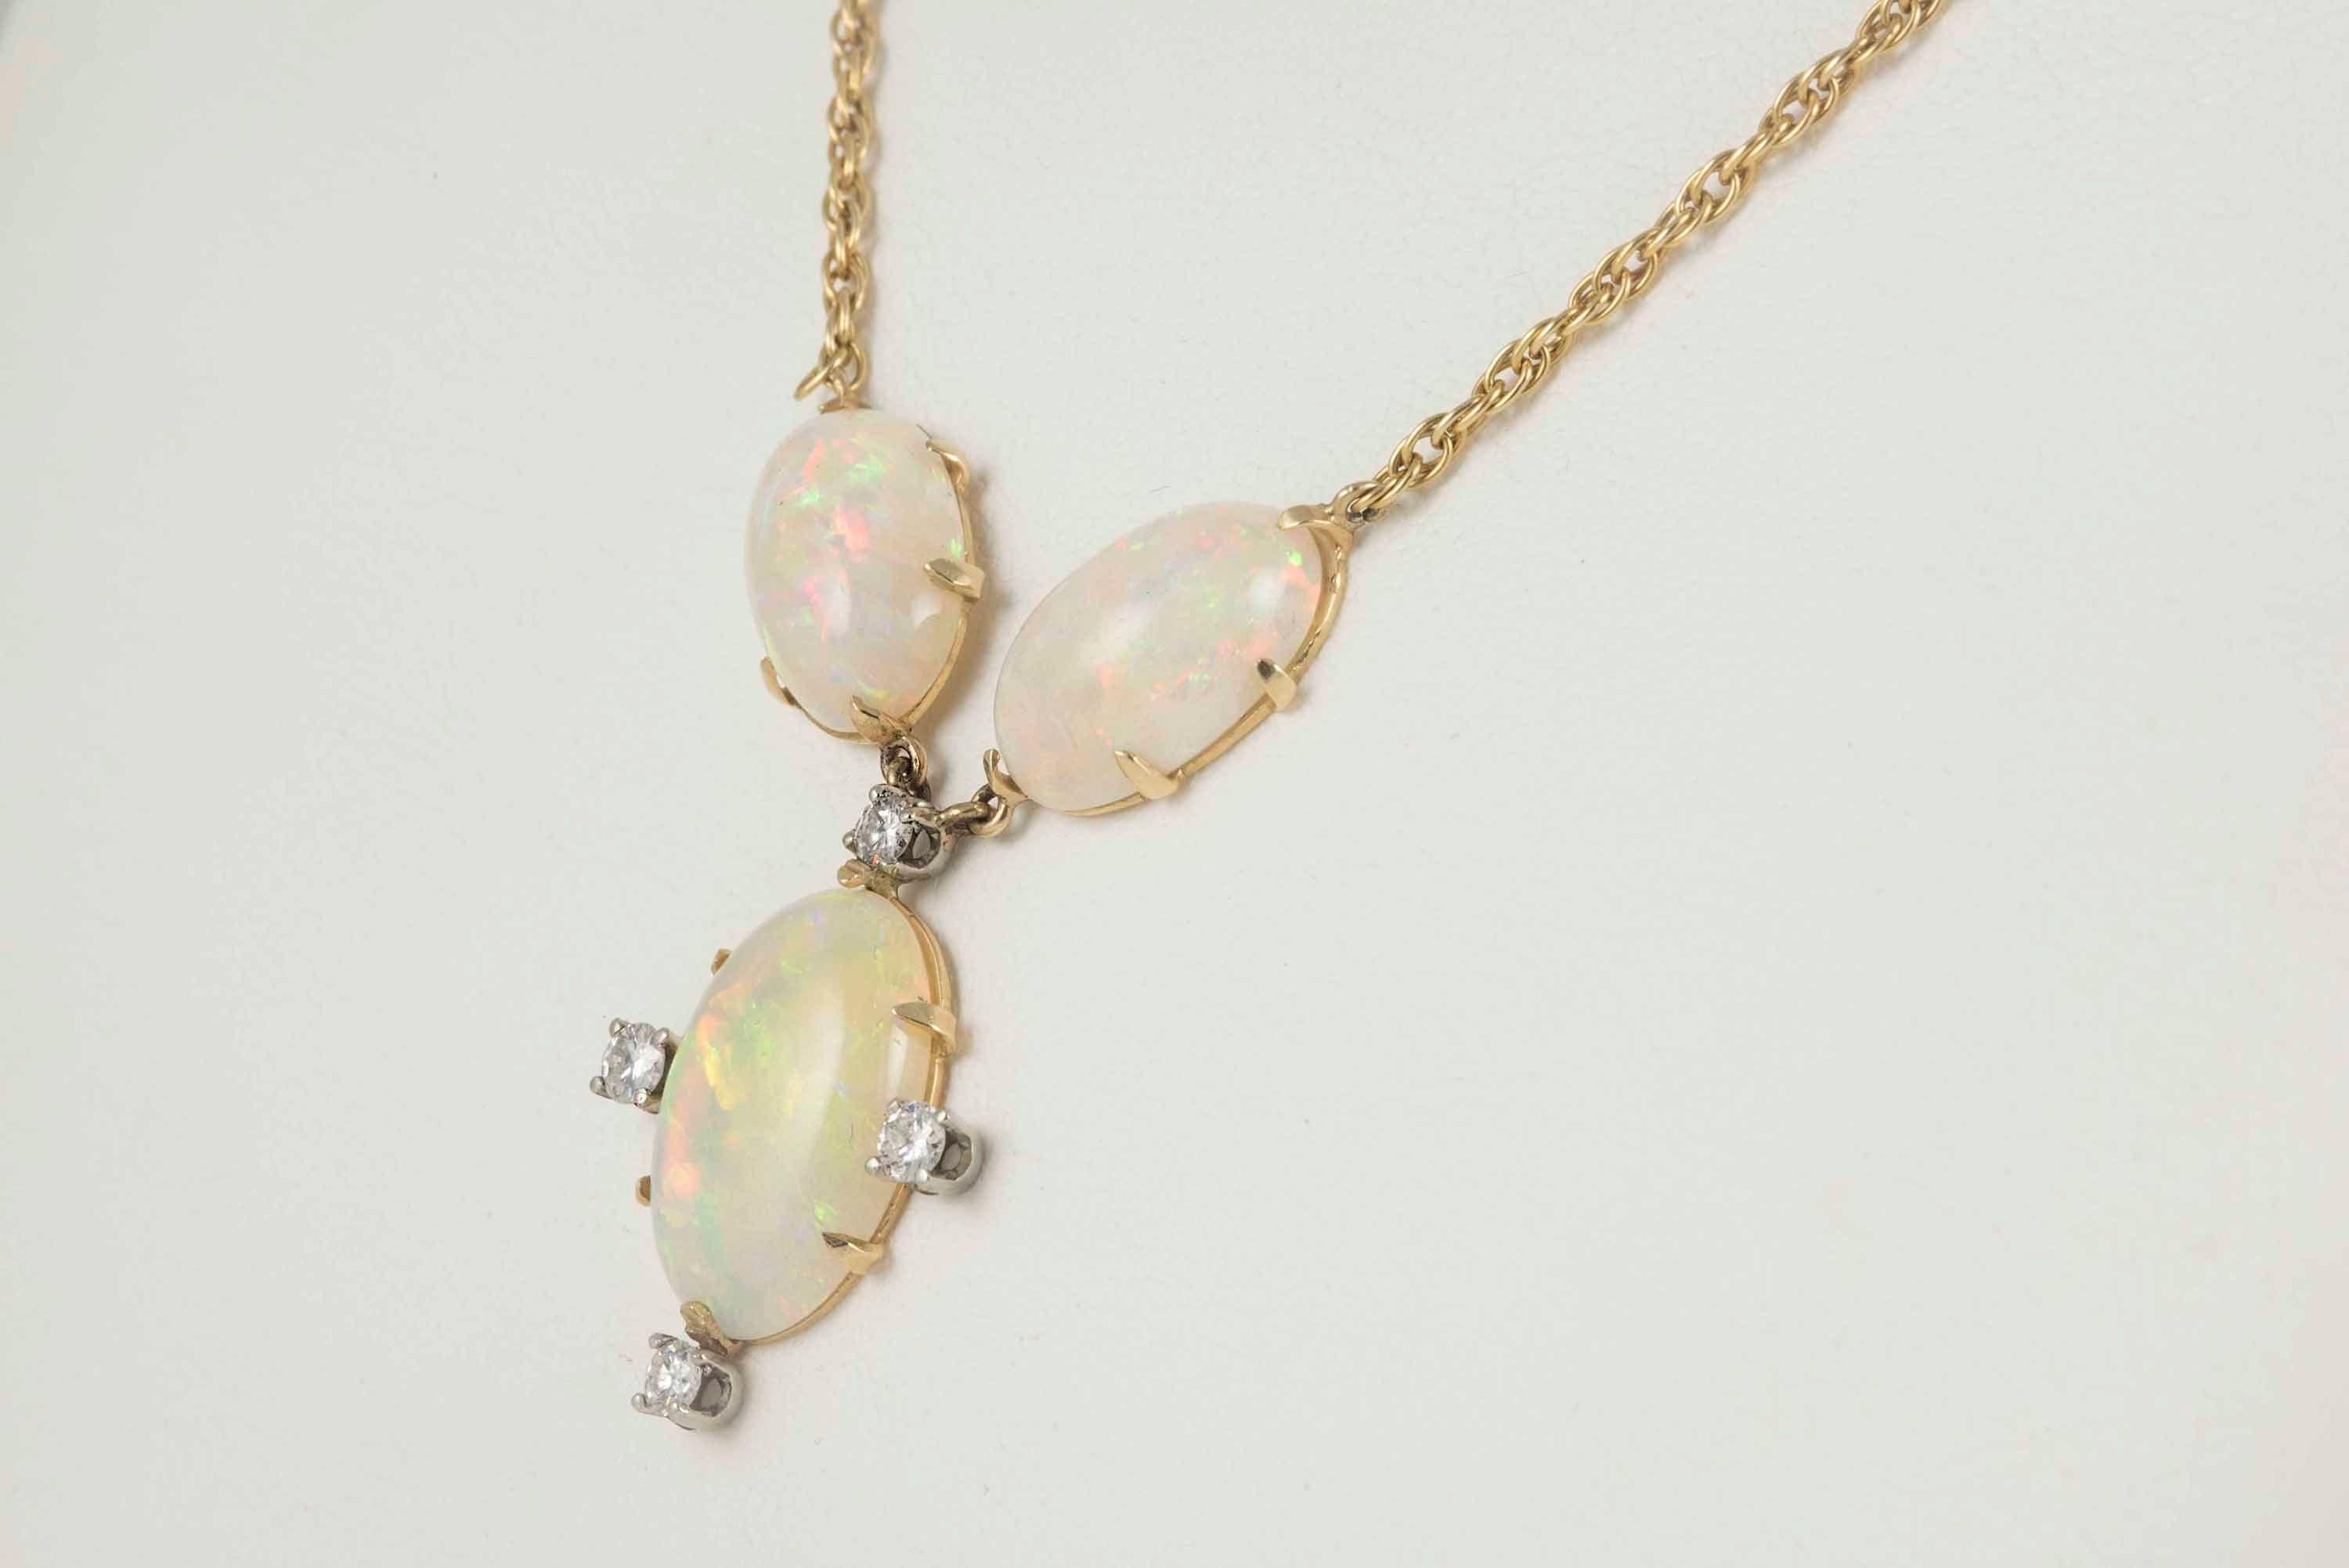 A trio of natural fine oval-shaped cabochon Australian opals -- two measuring 9mm x 5mm, one measuring 12mm x 18mm -- adorn this estate necklace crafted in 14kt yellow gold and embellished with four round diamonds totaling approximately 0.40 carats.